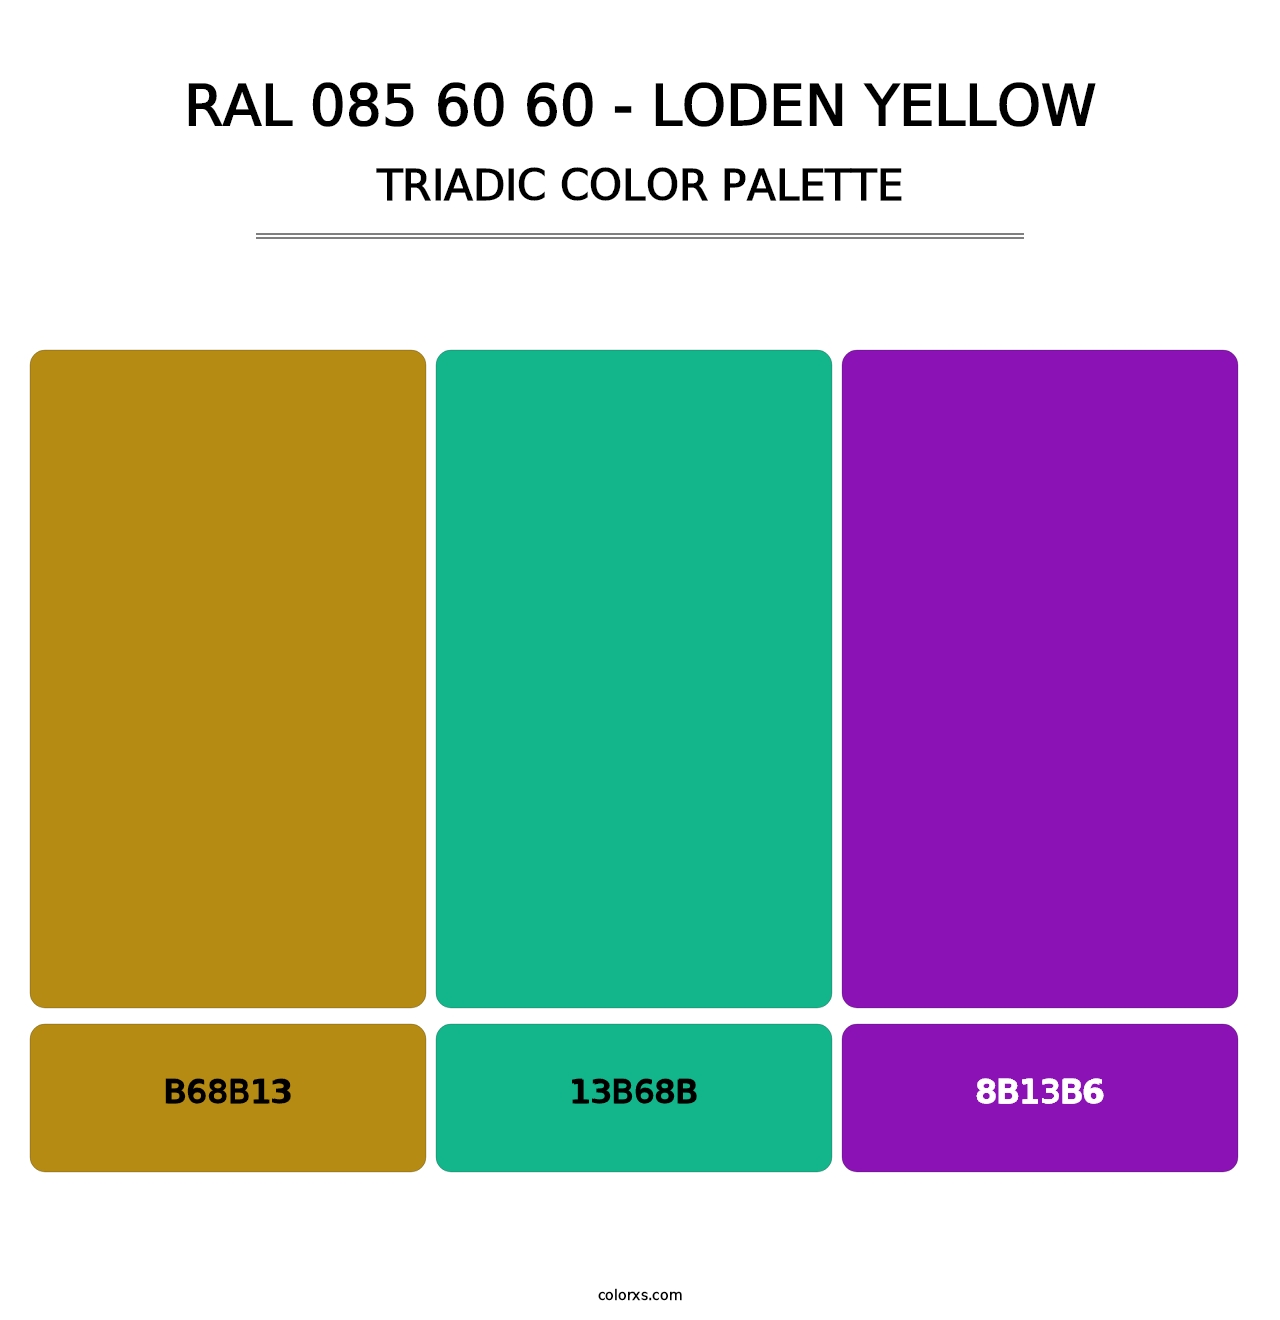 RAL 085 60 60 - Loden Yellow - Triadic Color Palette